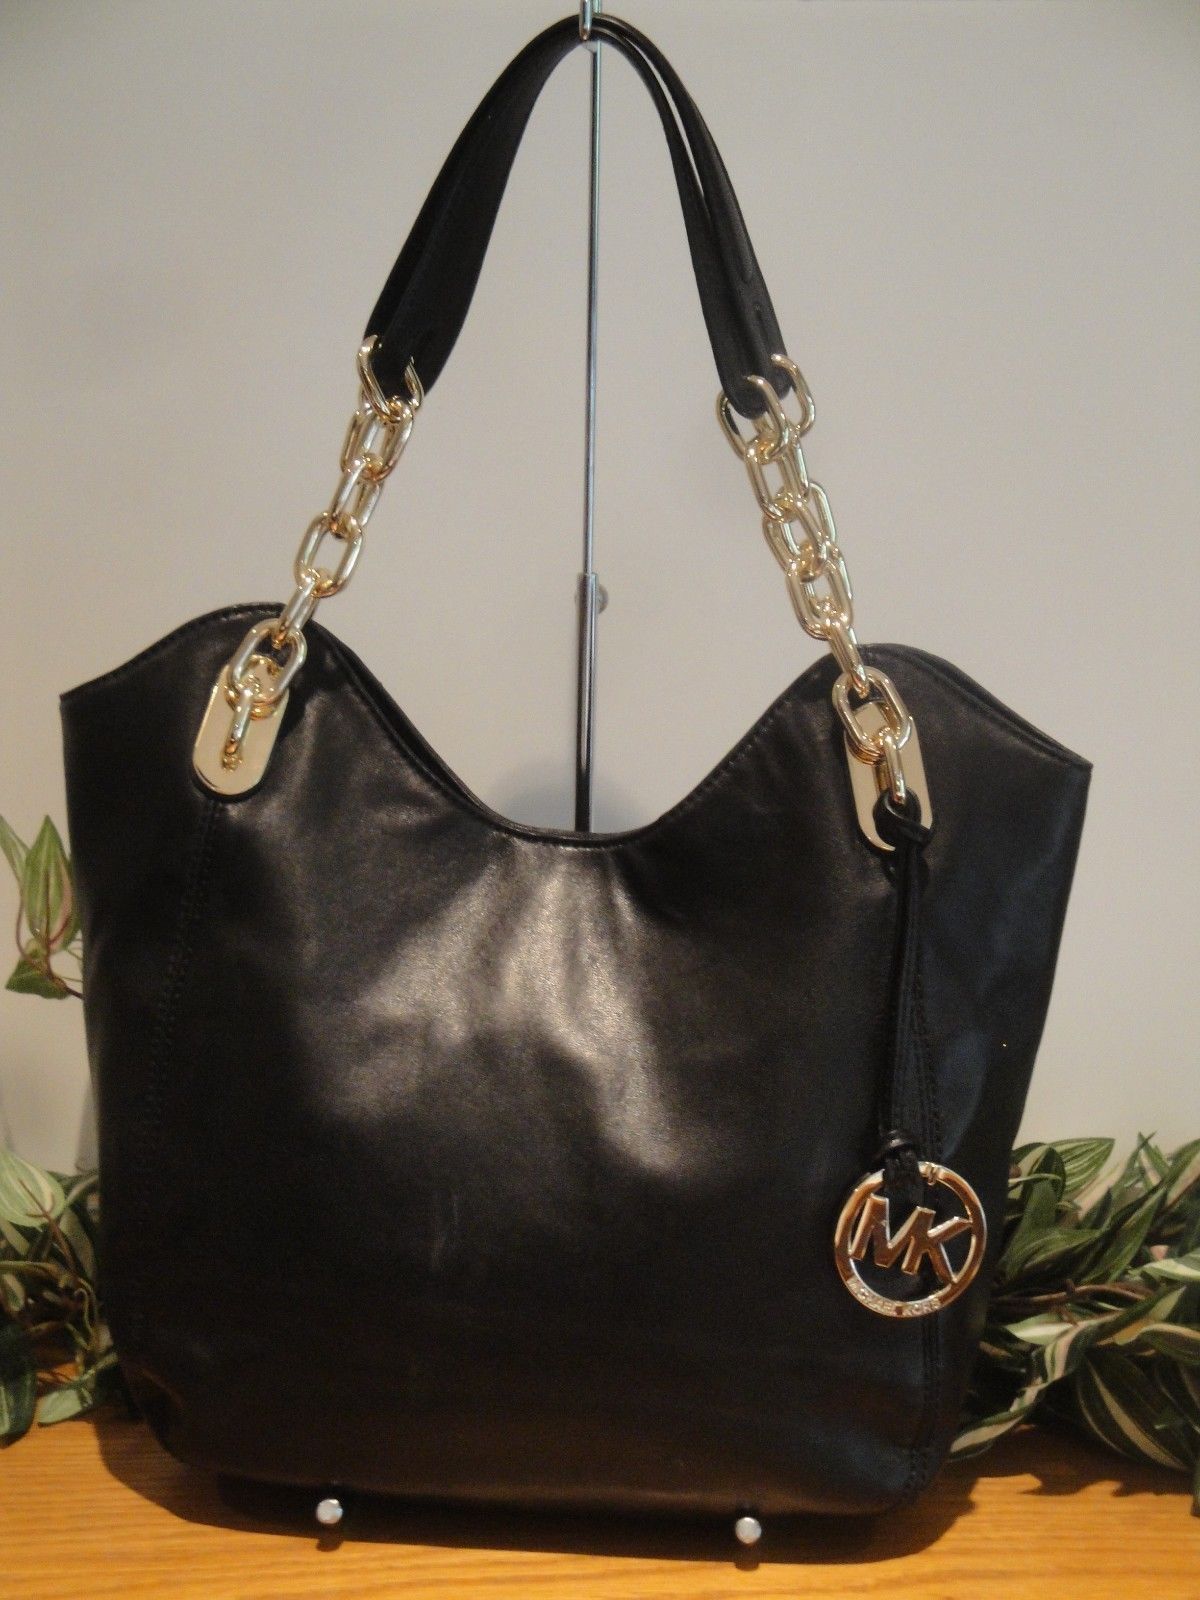 MICHAEL KORS LILLY MEDIUM TOTE BAG PURSE HOBO BLACK TOTE LEATHER GOLD ...